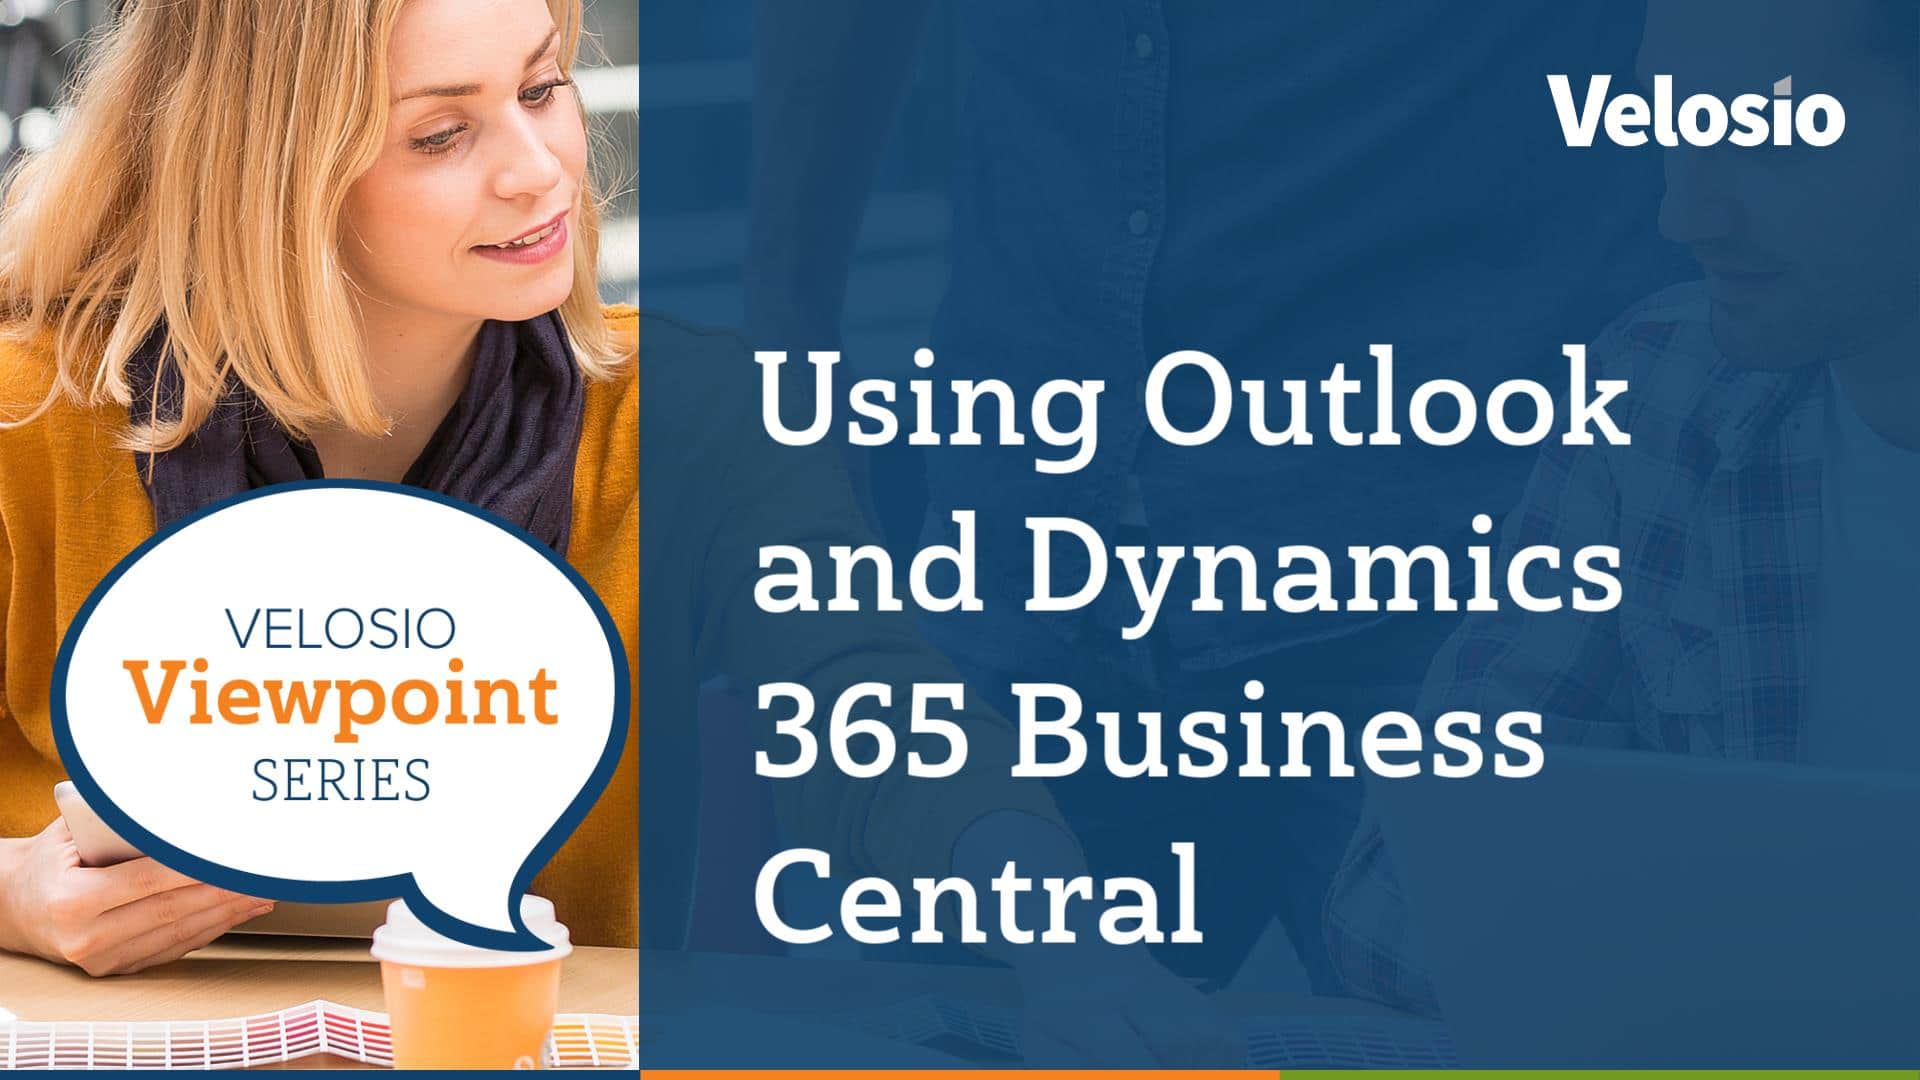 Outlook and Dynamics 365 Together